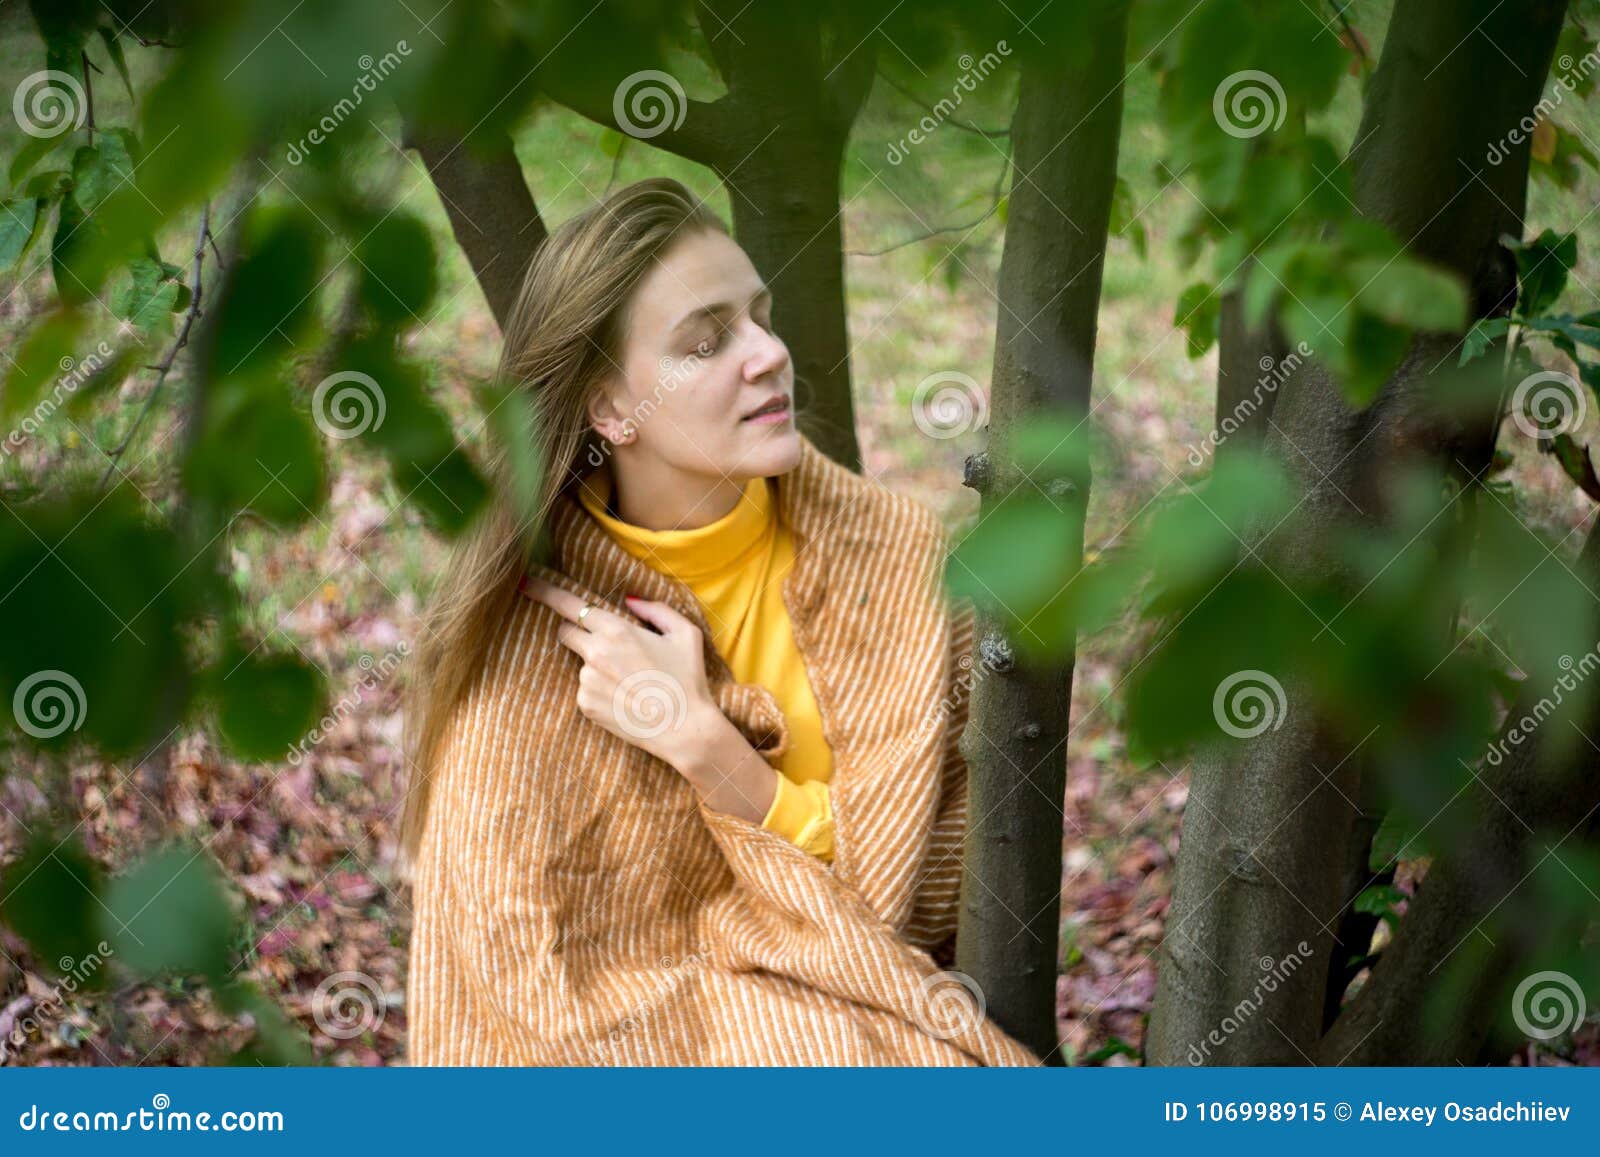 Girl is Wrapped in a Blanket Stock Image - Image of choice, love: 106998915